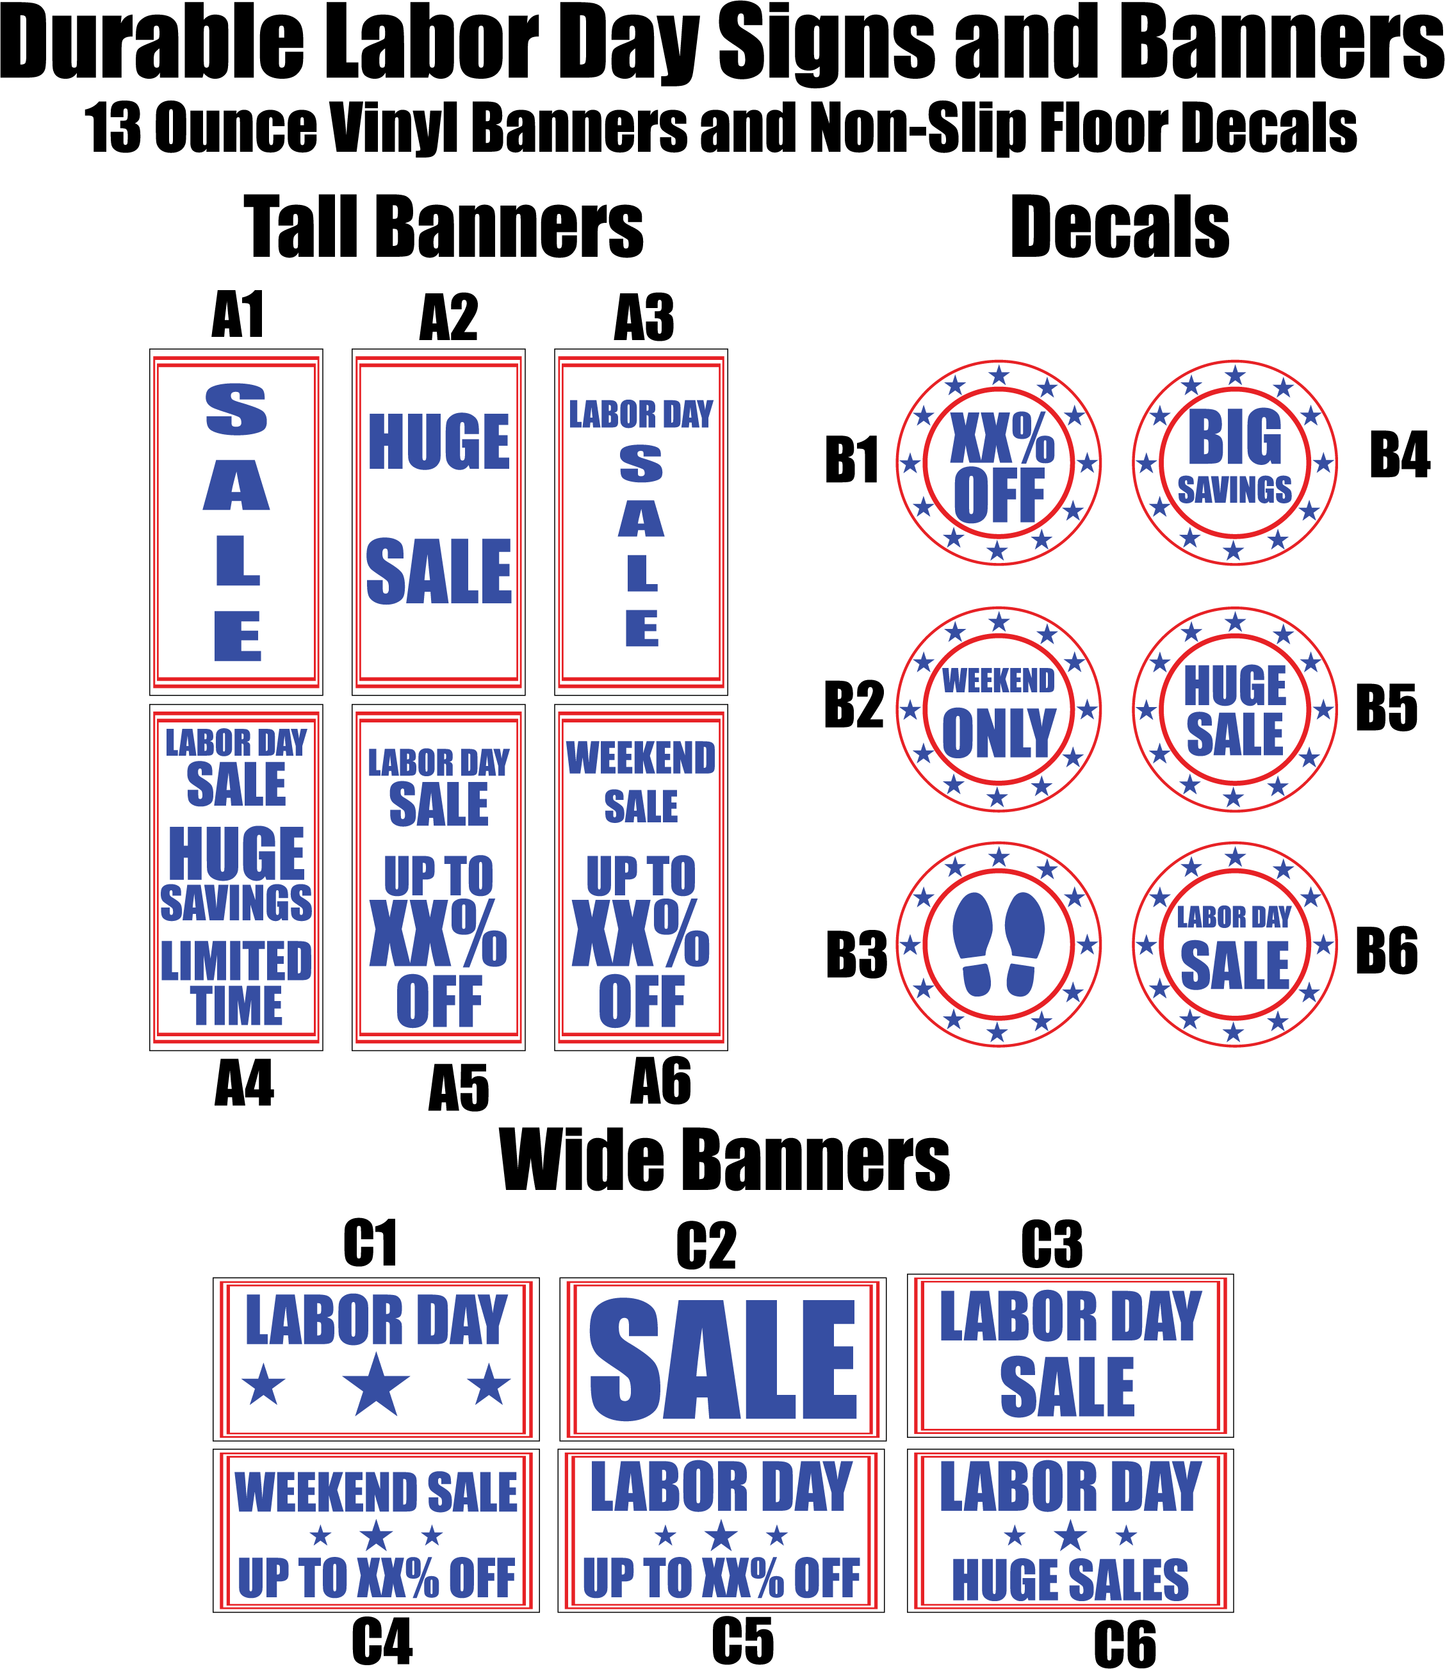 Labor Day Banners and Decals